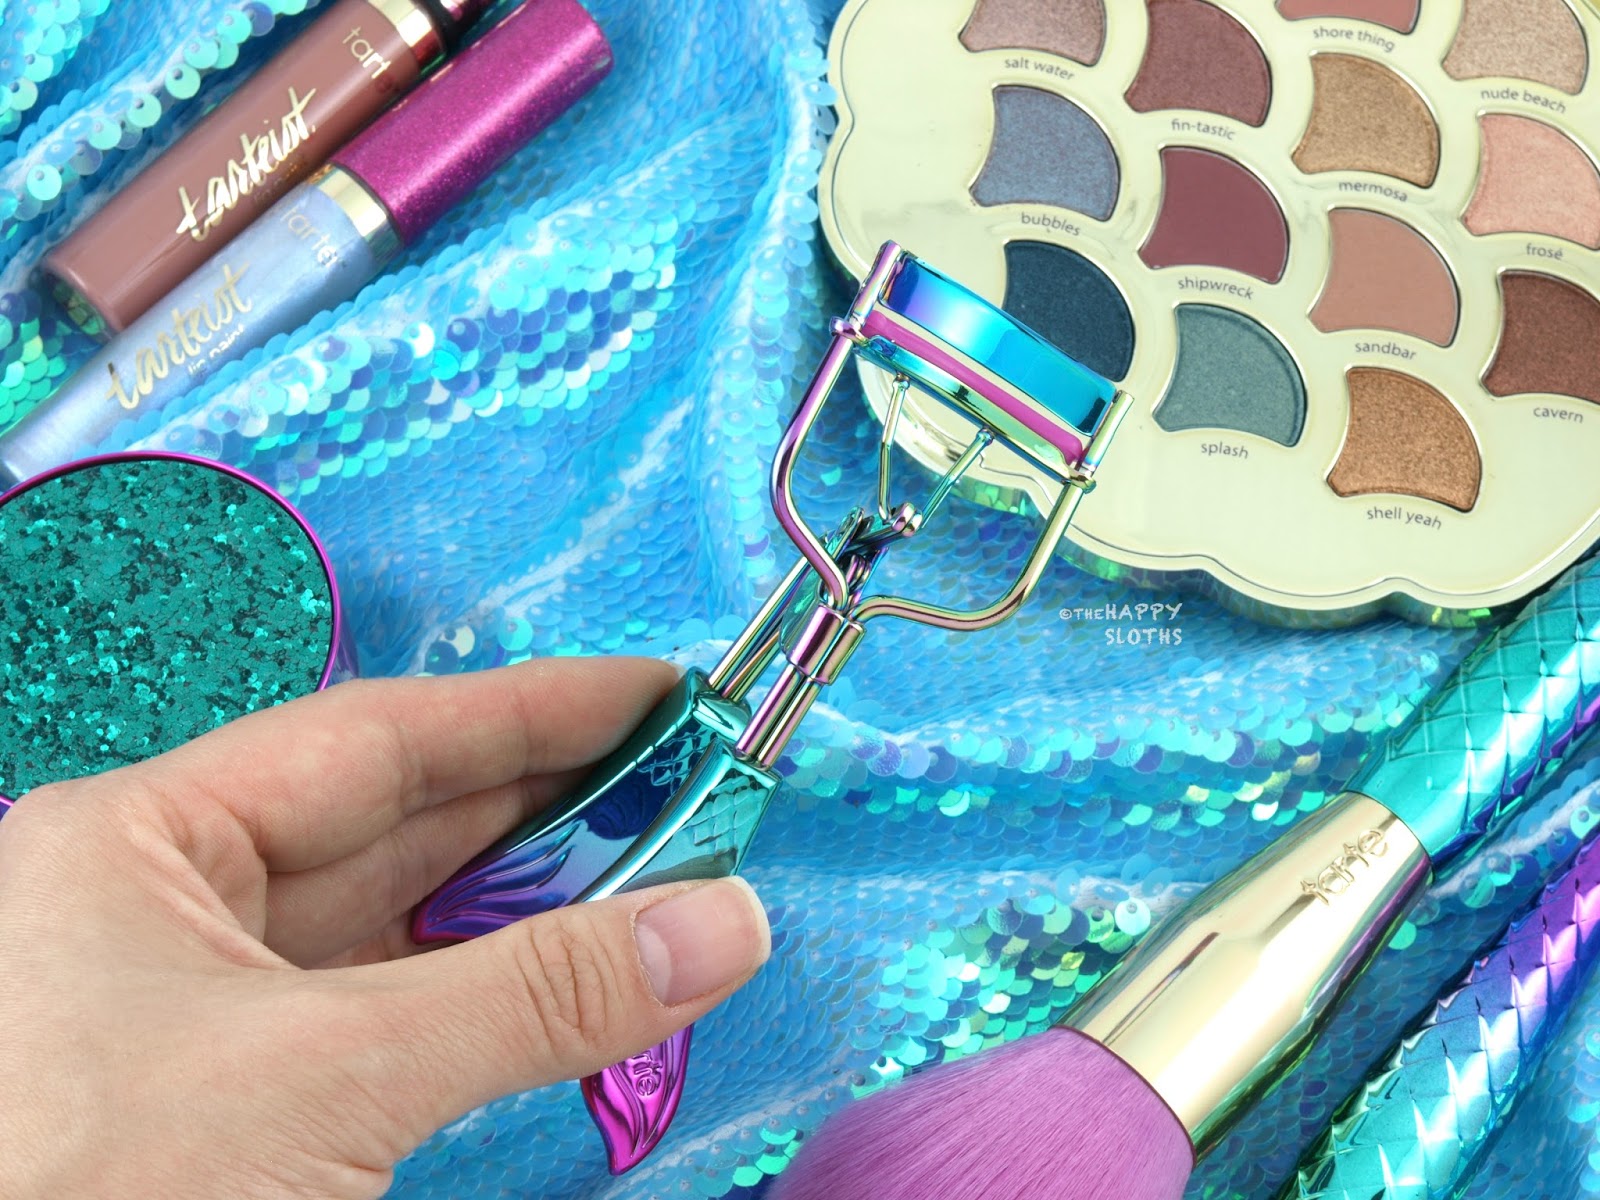 Tarte Mermaid Collection | Picture Perfect Eyelash Curler: Review & Swatches